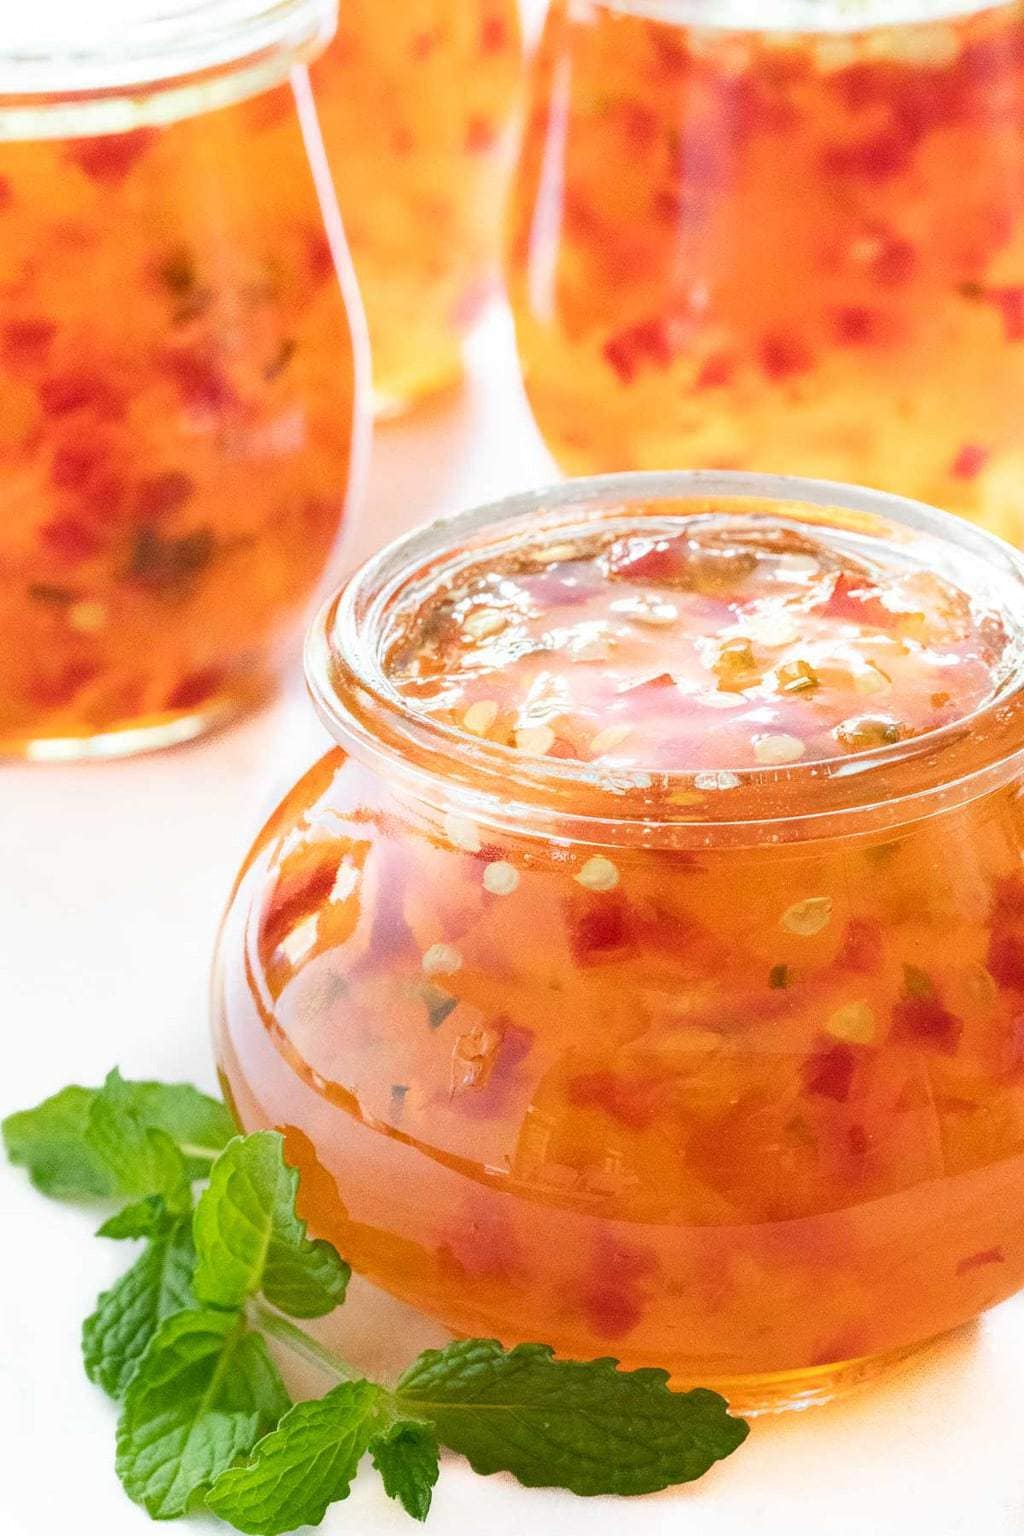 Vertical photo of Mango Jalapeño Pepper Jelly in a decorative Weck glass canning jar.